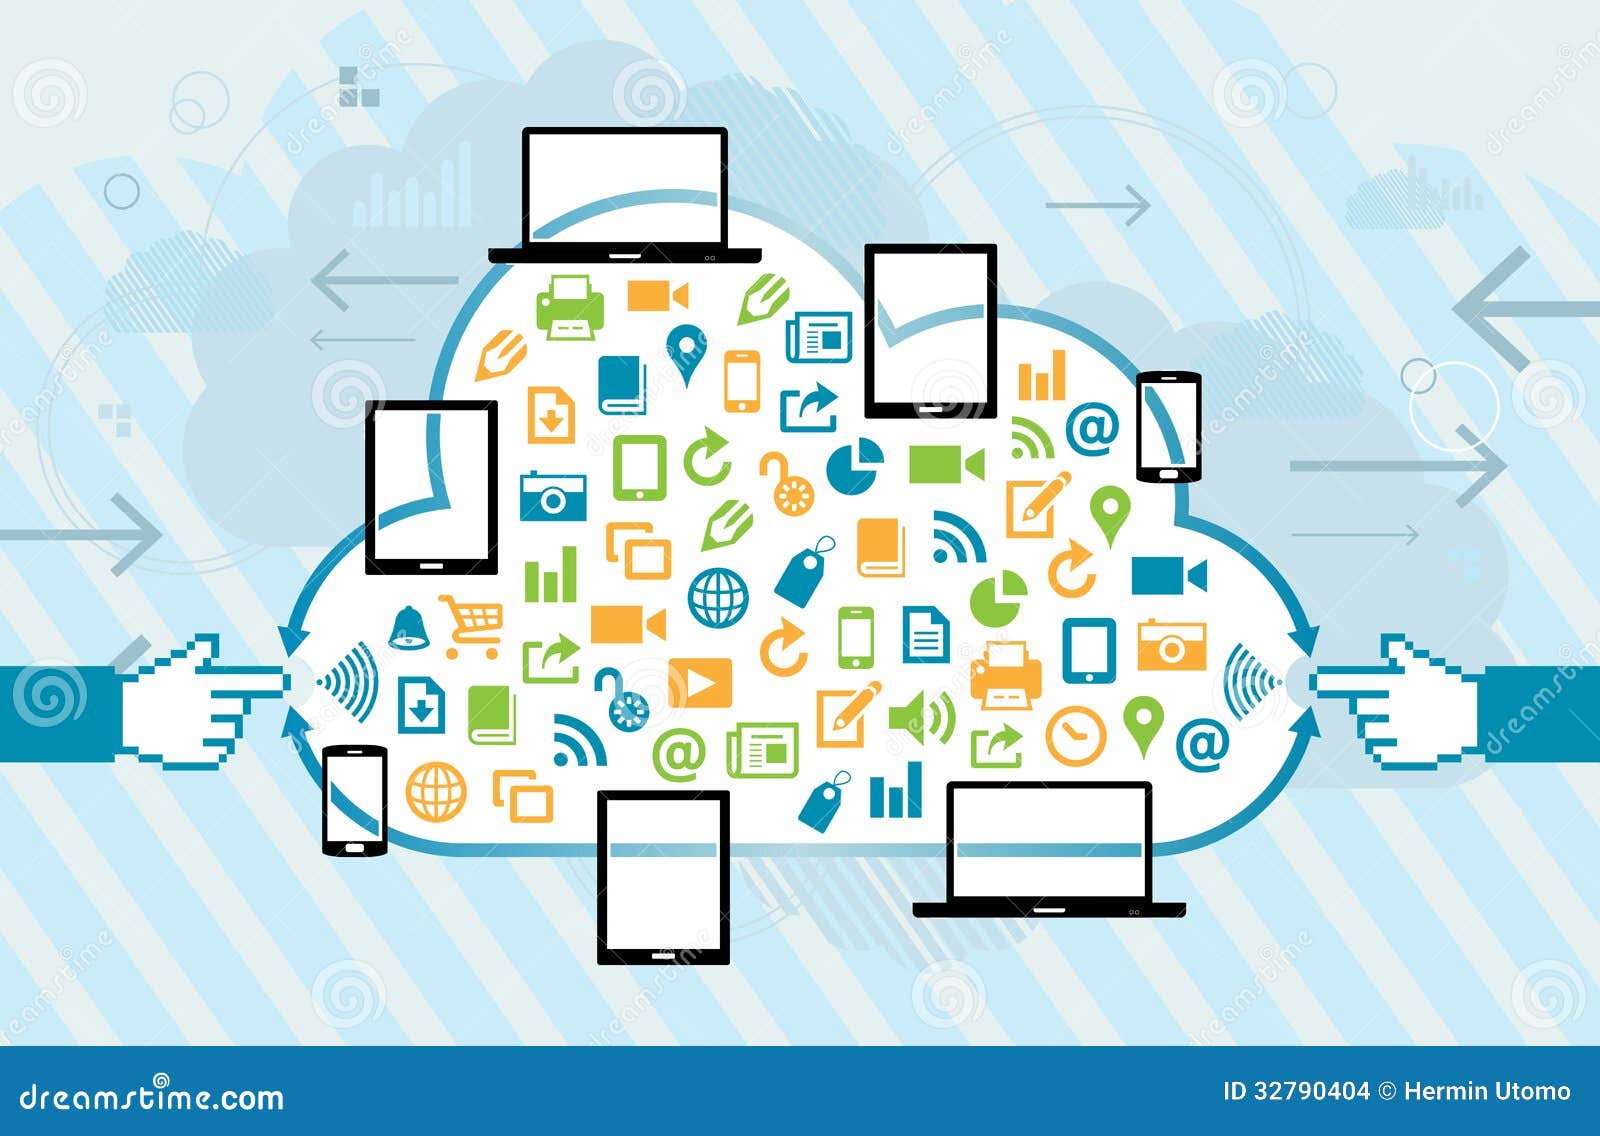 Mobile Cloud Technology And Technology